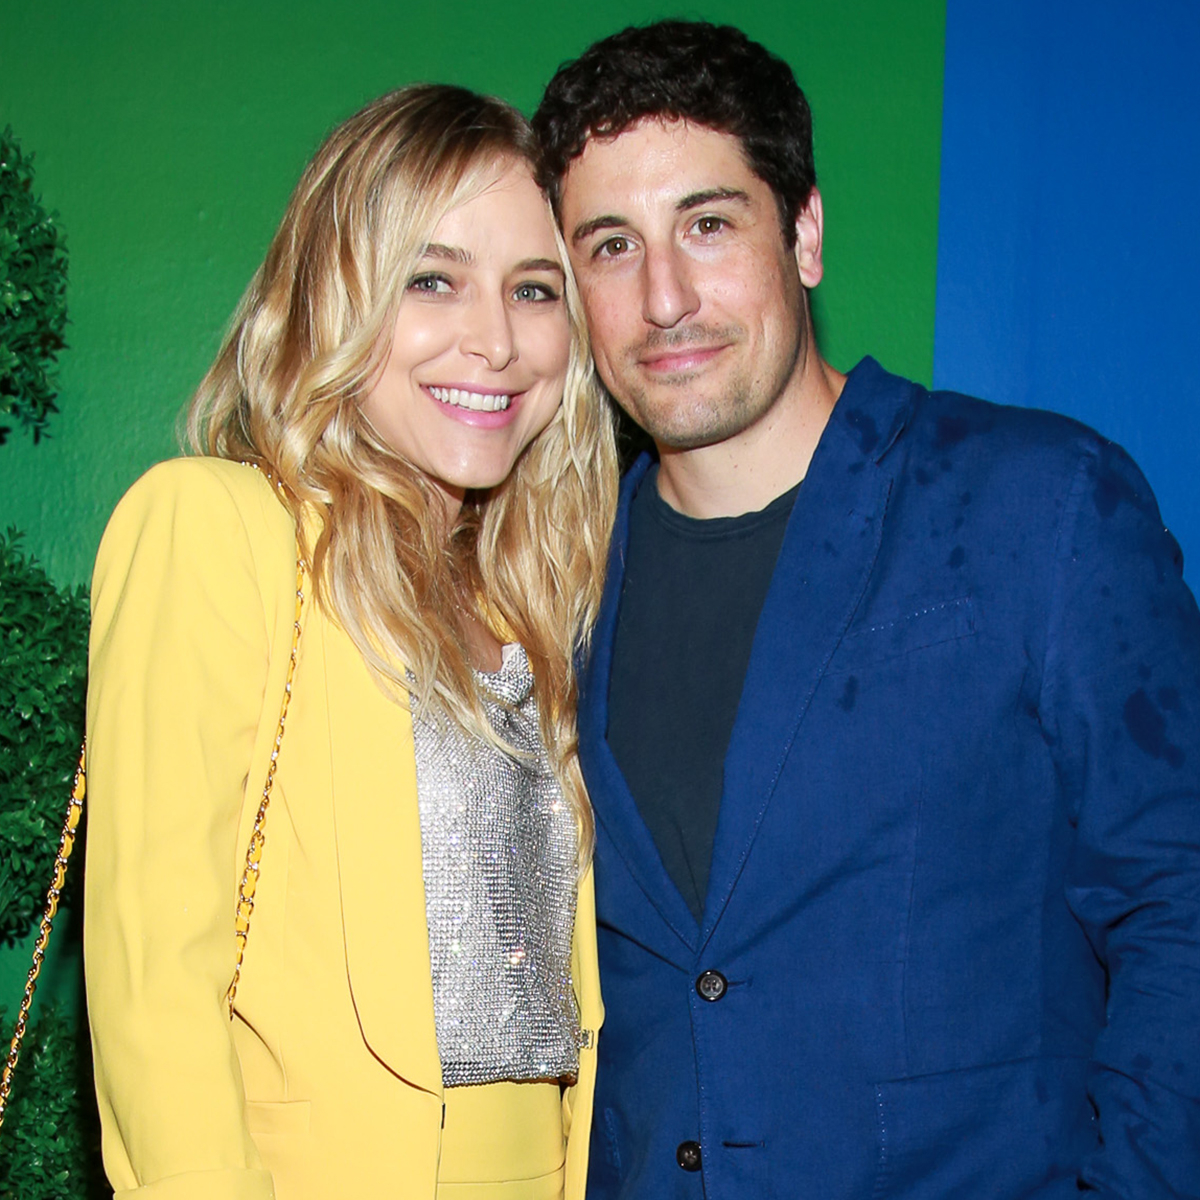 Amazing Amateur Teen Threesome - 18 Times Jason Biggs and Wife Jenny Mollen Were #CoupleGoals - E! Online